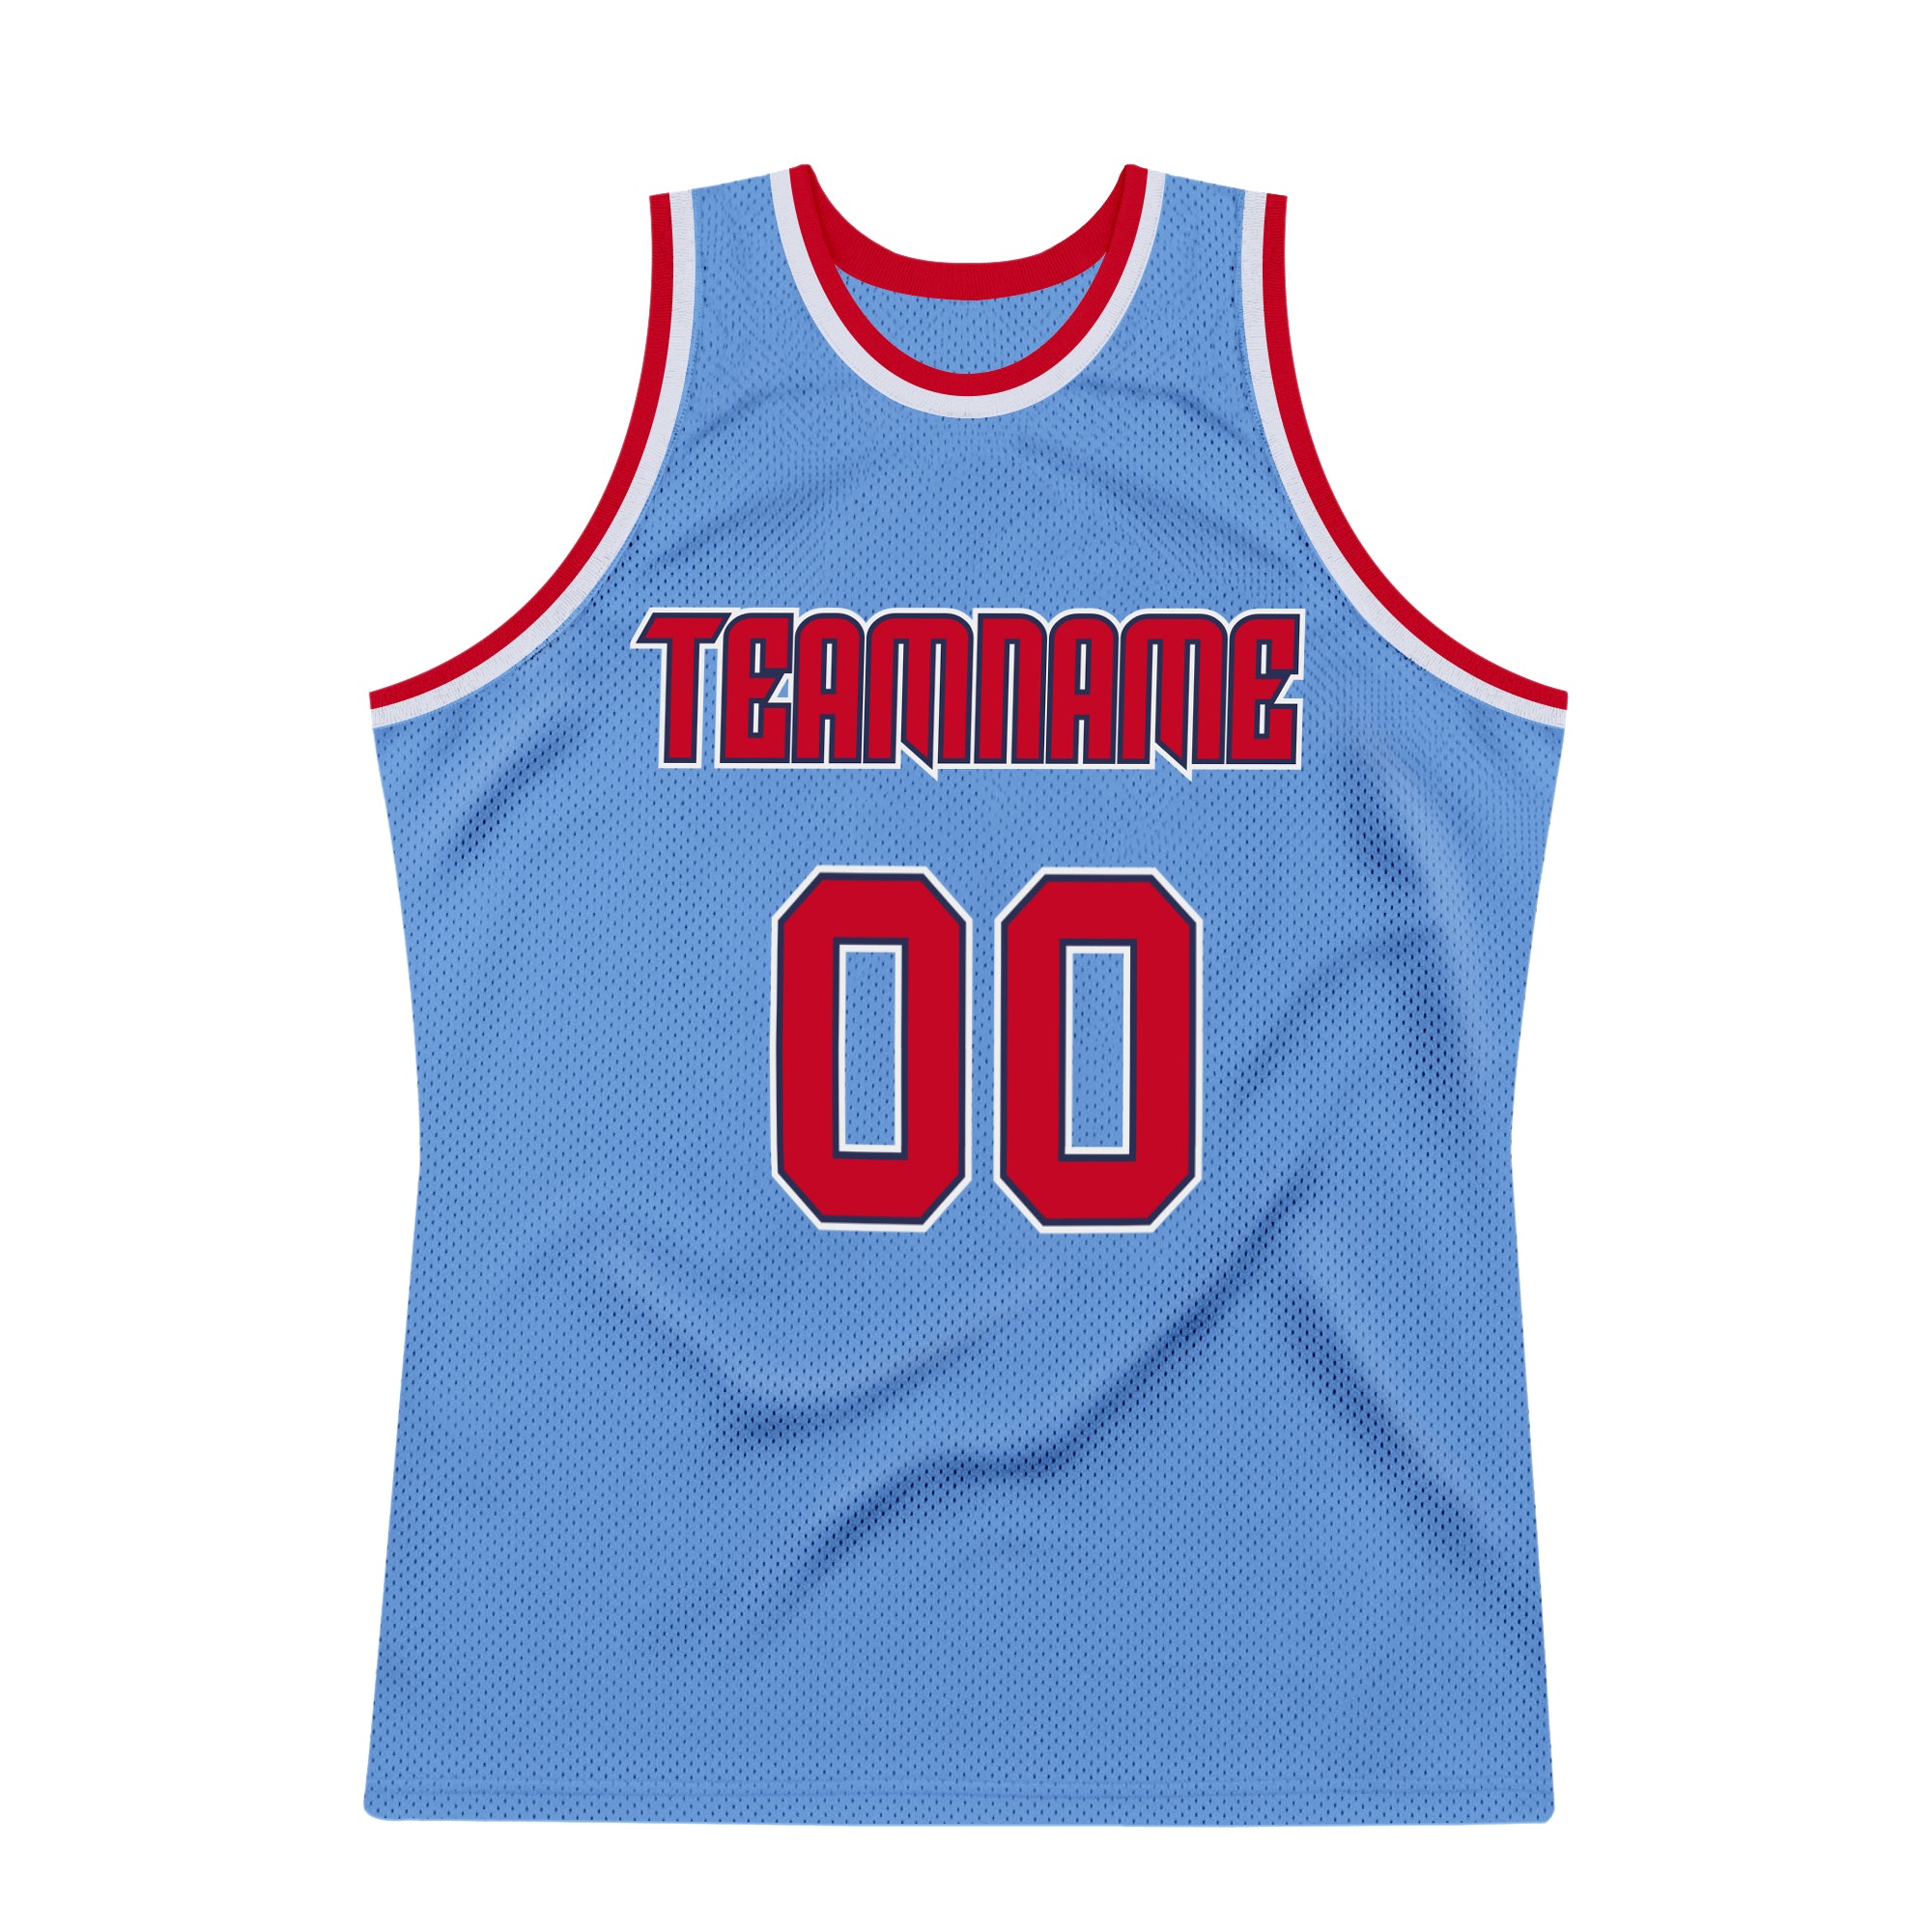 FIITG Custom Basketball Jersey Light Blue White-Red Authentic Throwback Men's Size:3XL